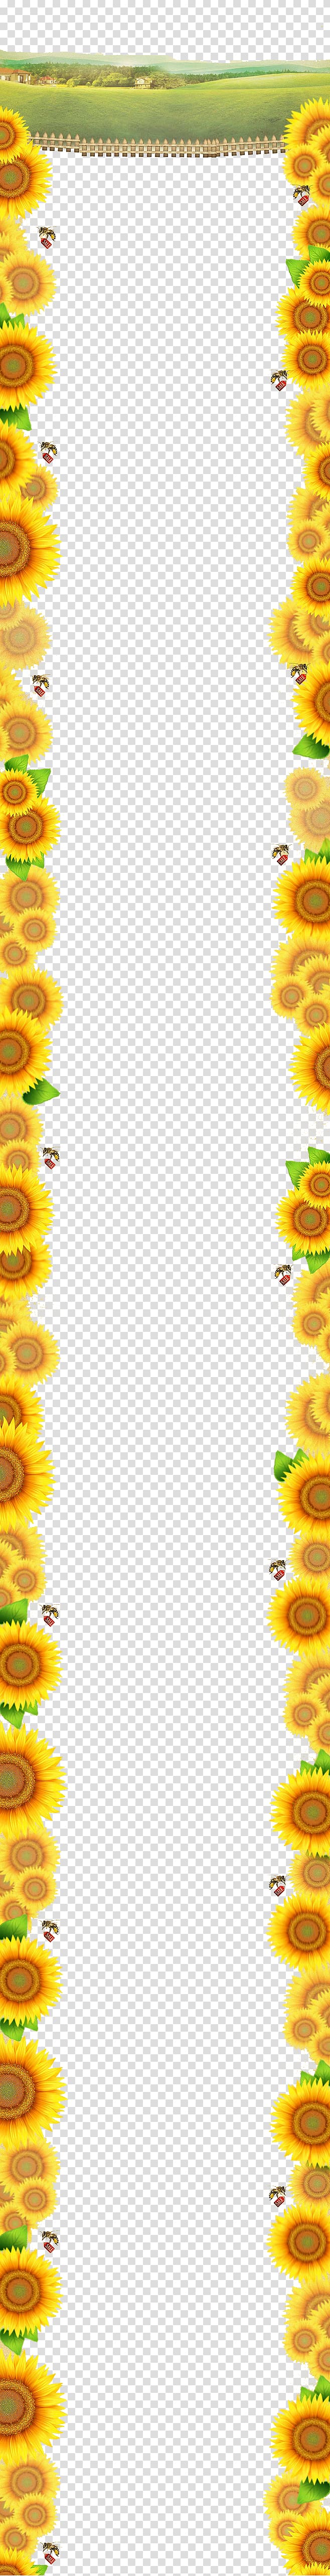 Yellow Area Angle Pattern, Sunflower Border transparent background PNG clipart